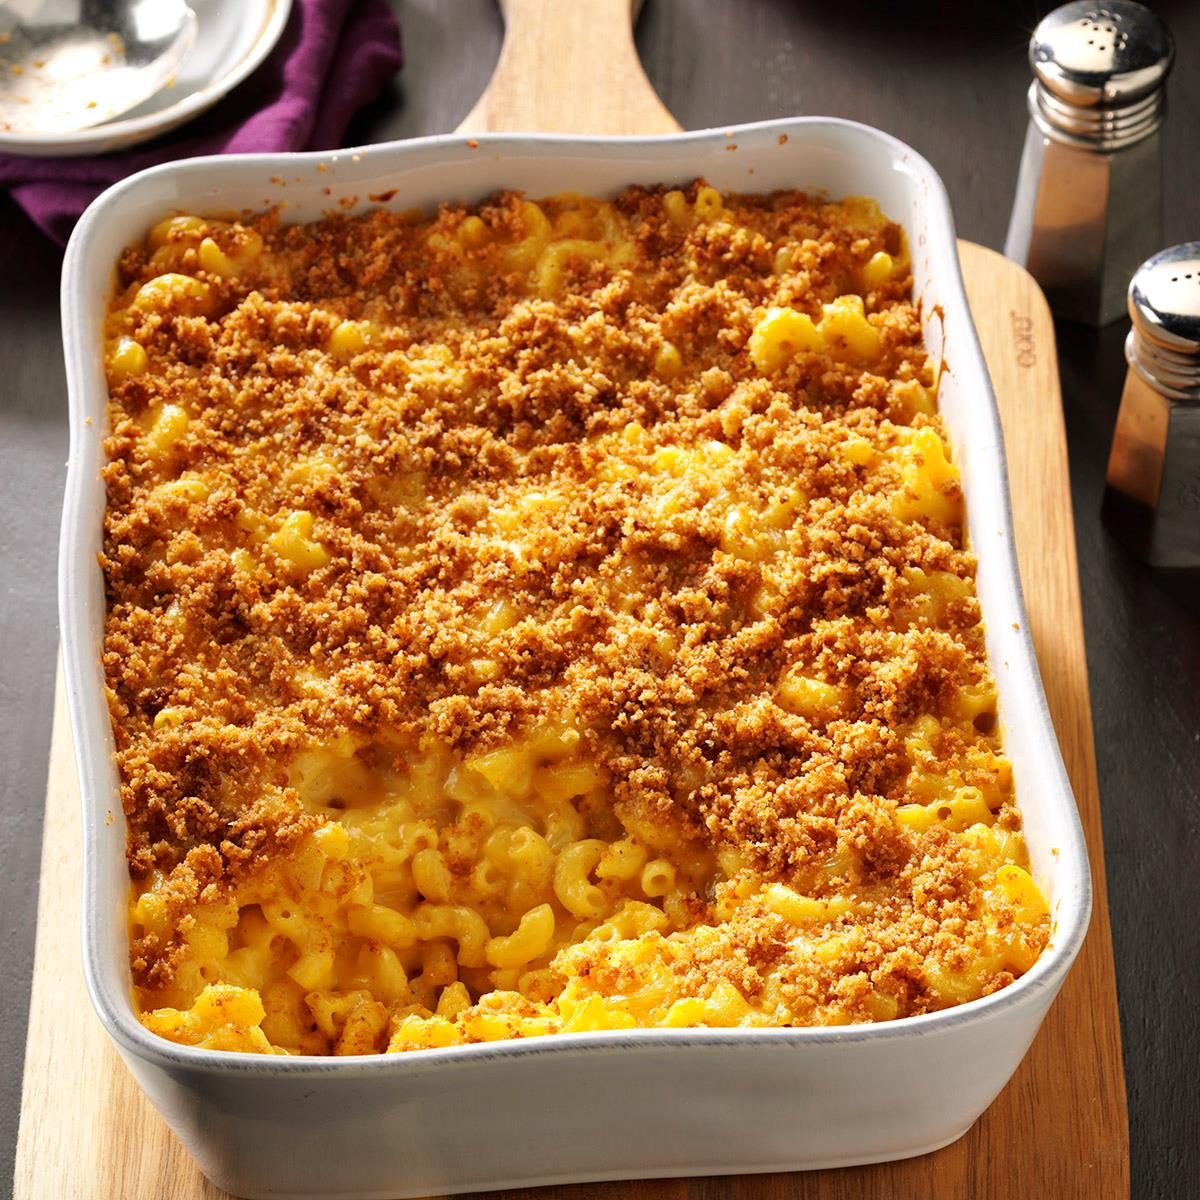 Baked Mac And Cheese EXPS SDDJ17 25257 D08 04 4b 7 